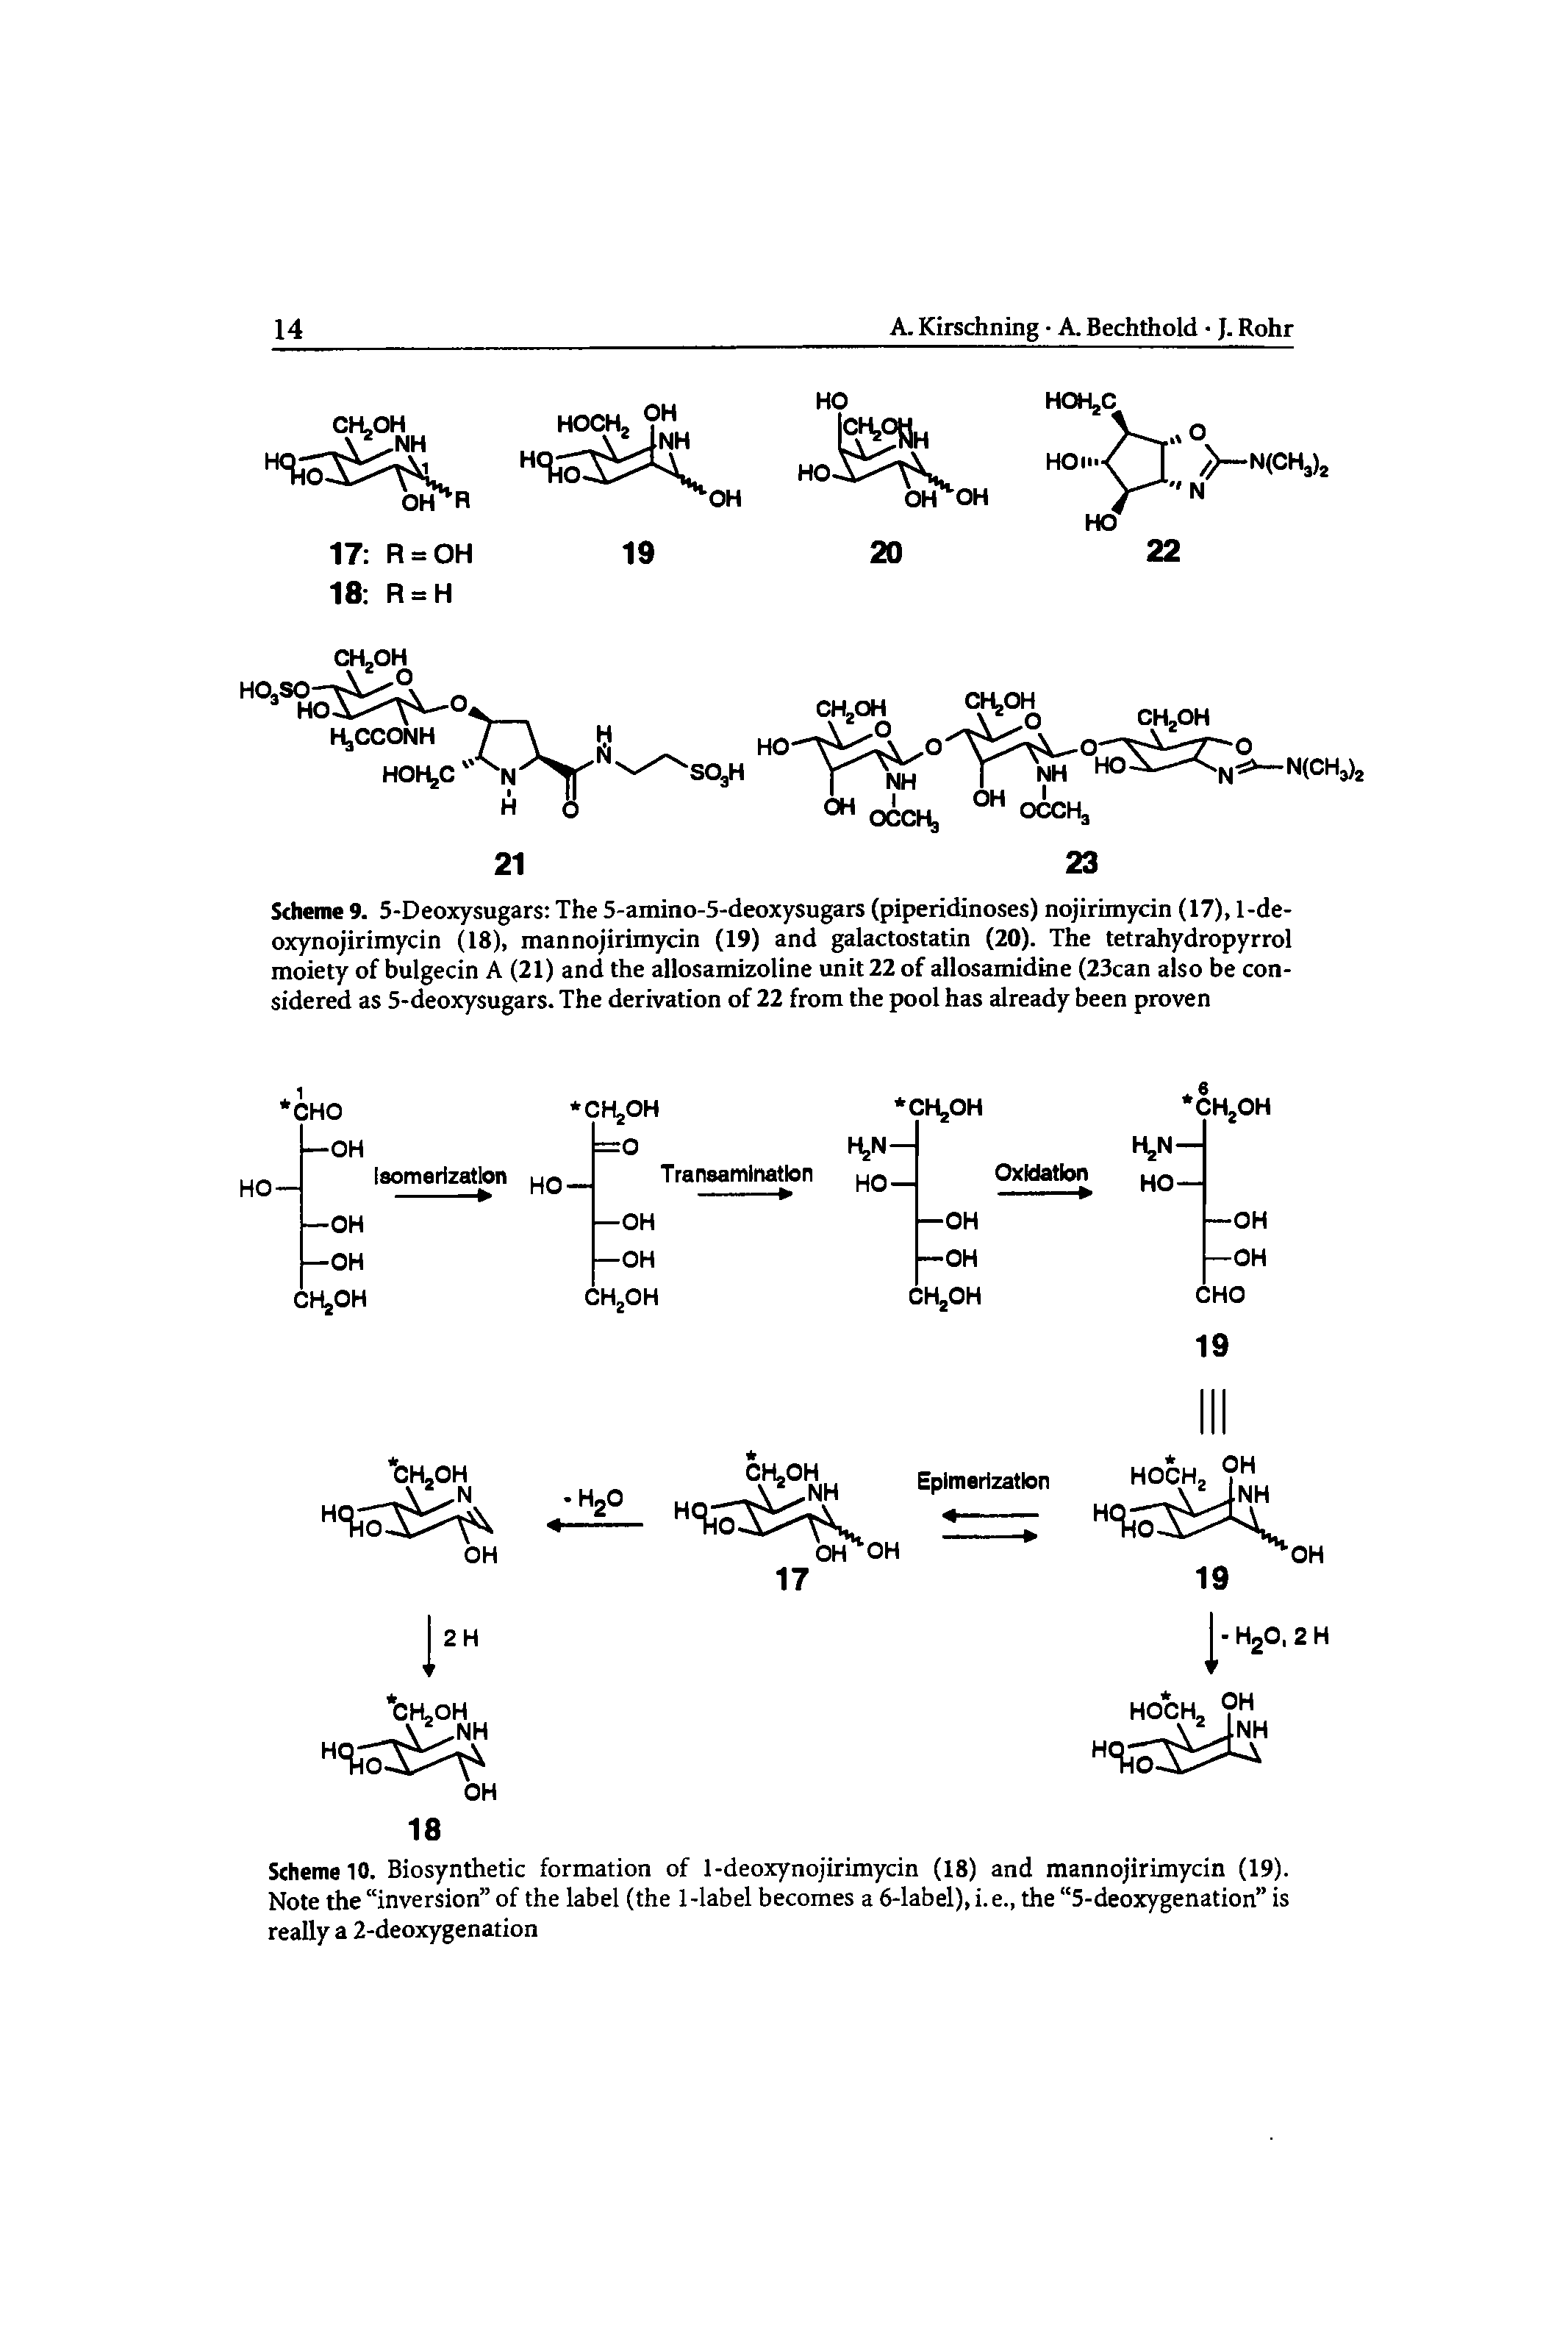 Scheme 10. Biosynthetic formation of 1-deoxynojirimycin (18) and mannojirimycin (19). Note the inversion of the label (the 1 -label becomes a 6-label), i. e., the 5-deoxygenation is really a 2-deoxygenation...